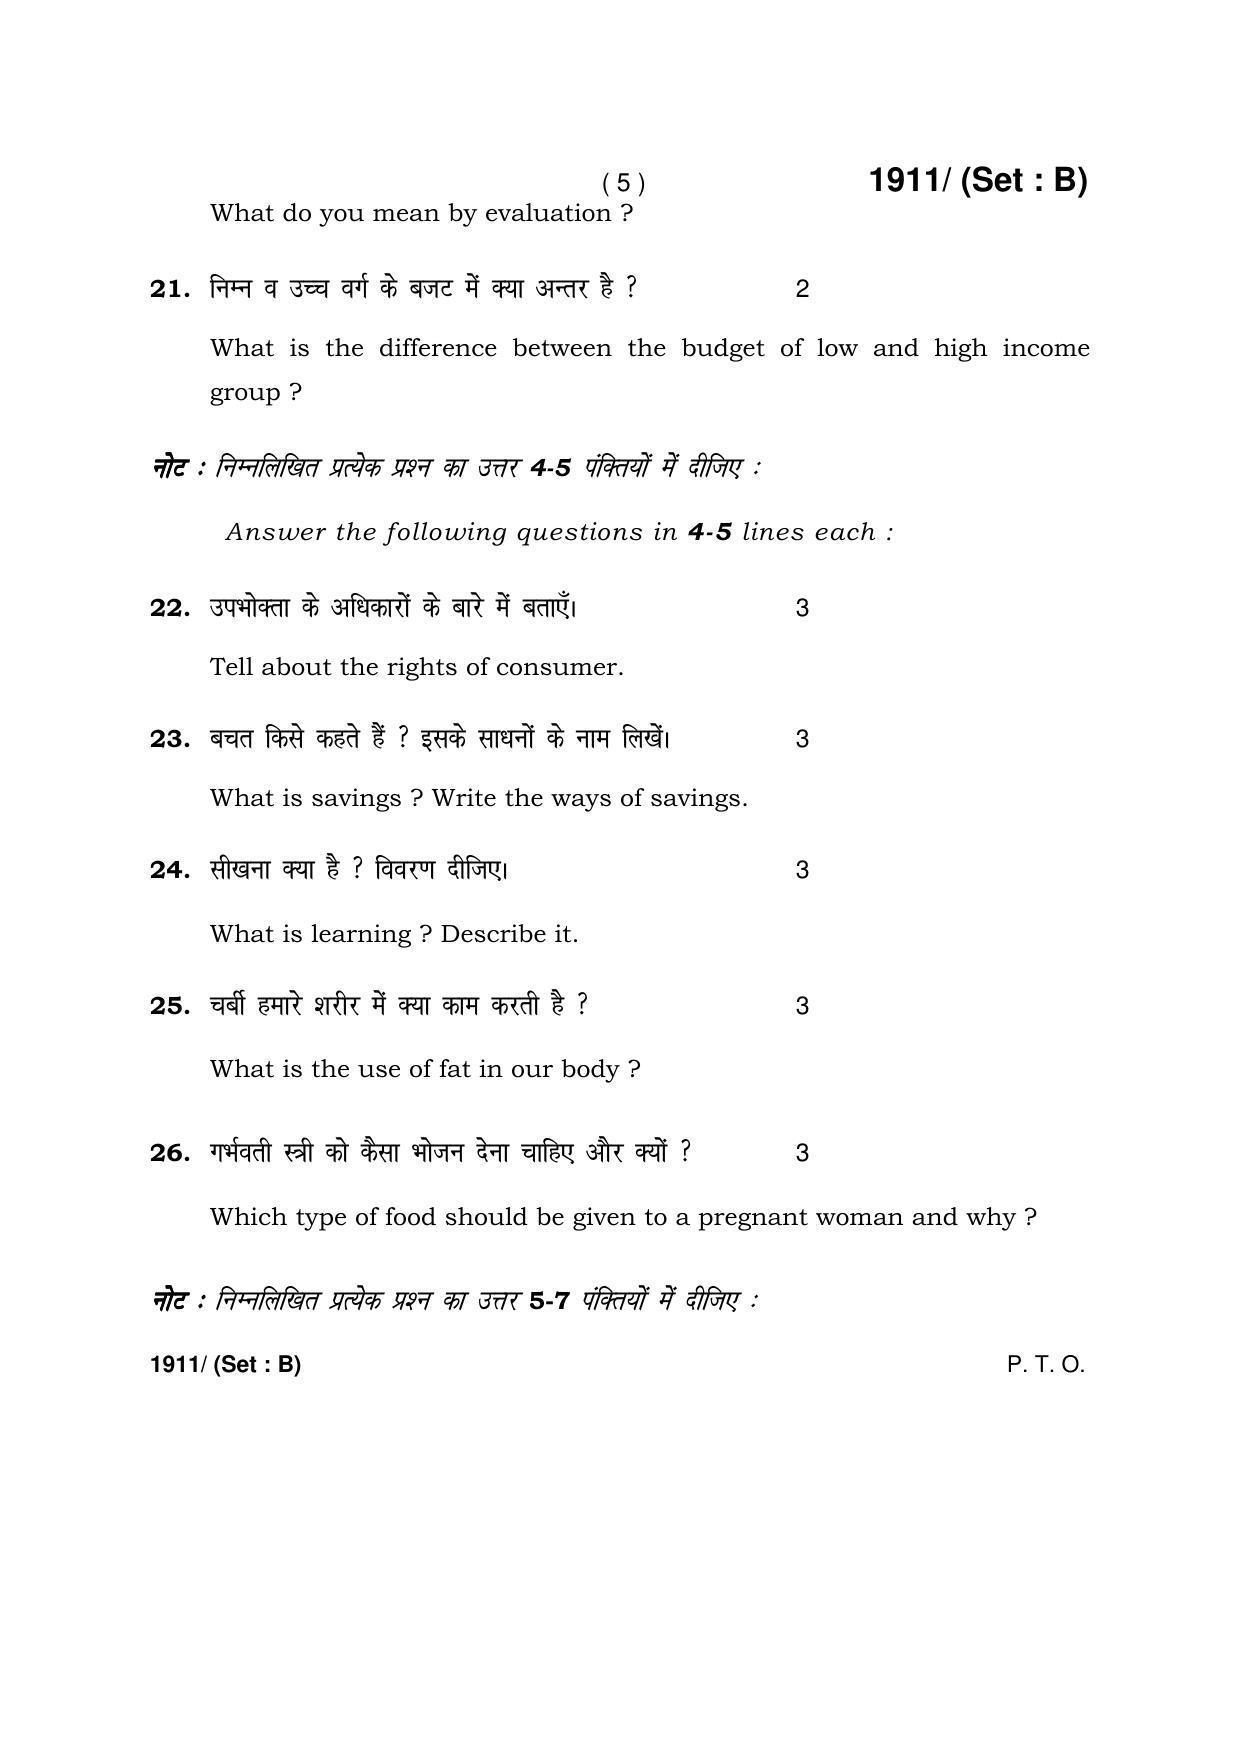 Haryana Board HBSE Class 10 Home Science -B 2017 Question Paper - Page 5